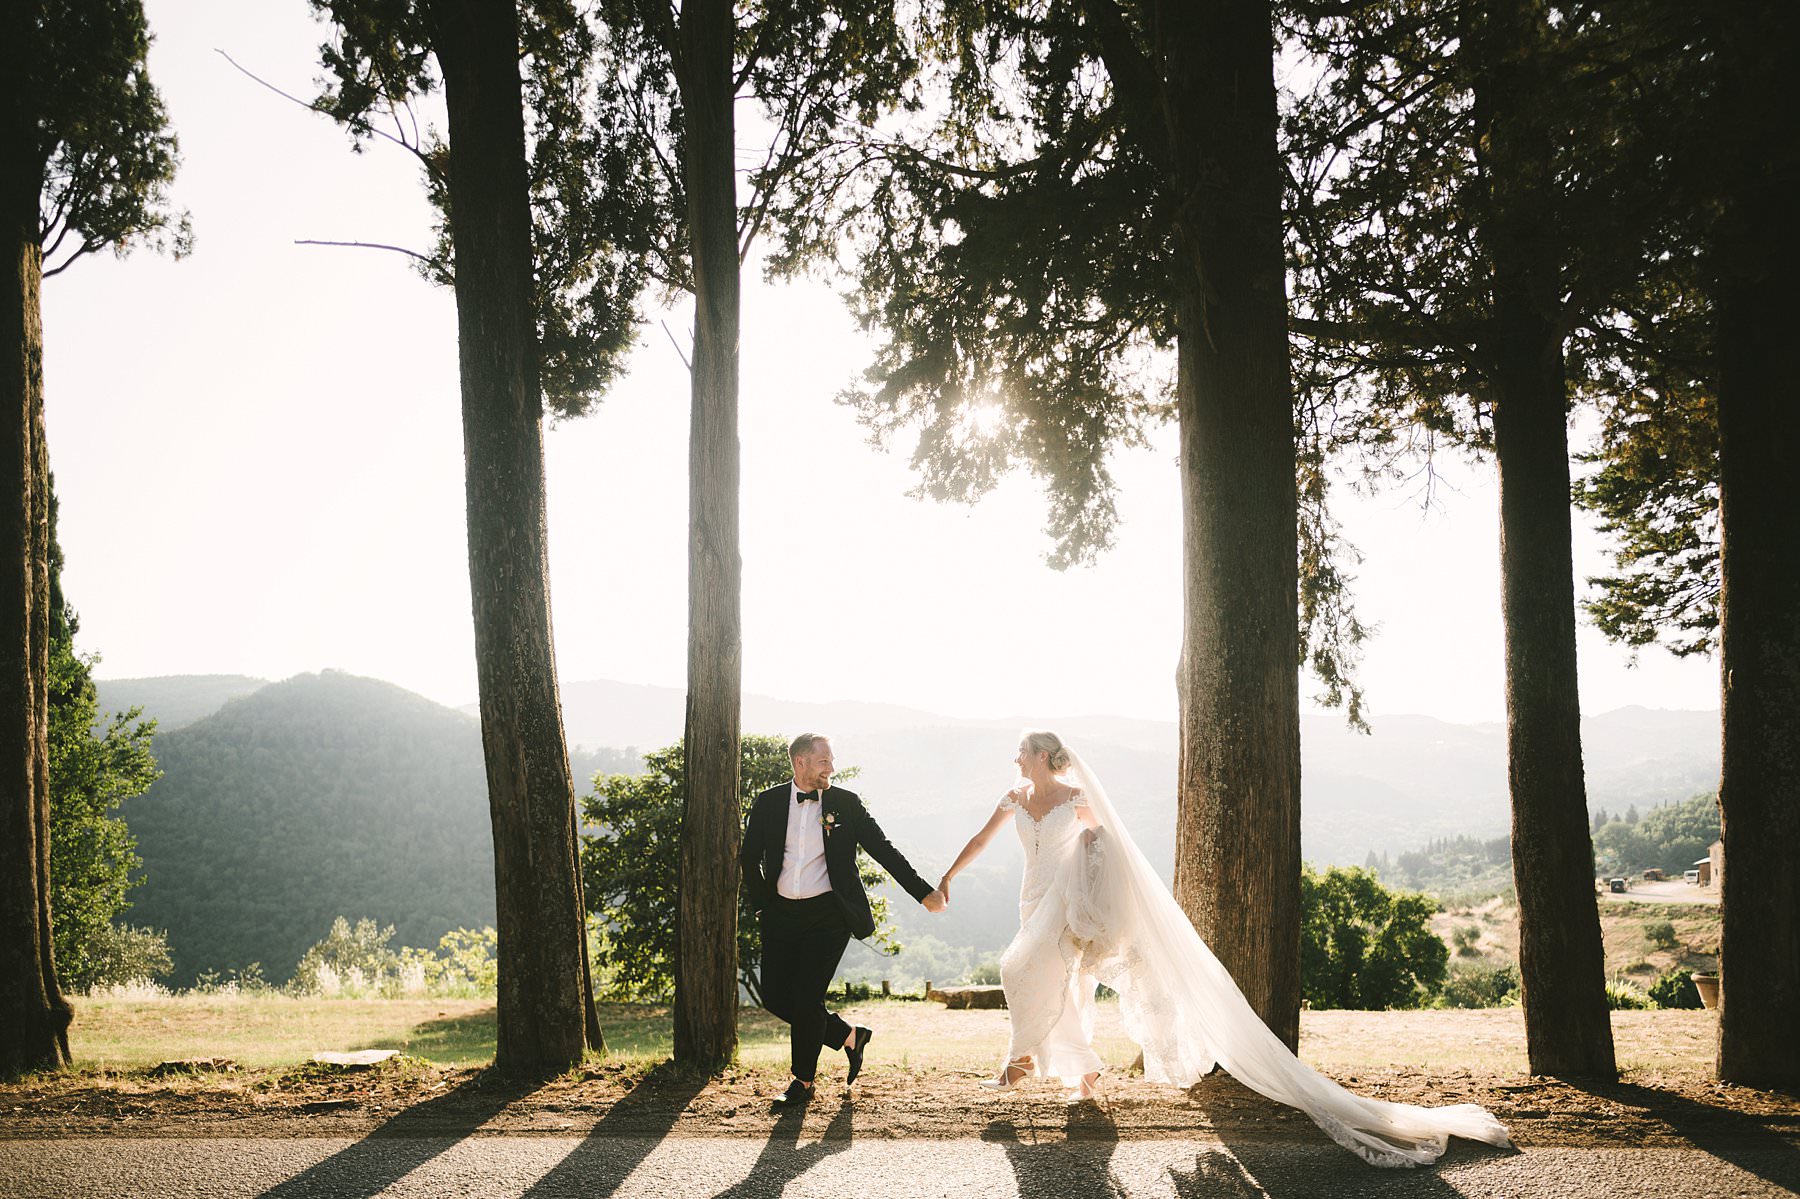 Romantic wedding in Italy at the charming Castello del Trebbio. Exciting and fun bride and groom portrait session during intimate destination wedding in the countryside of Tuscany